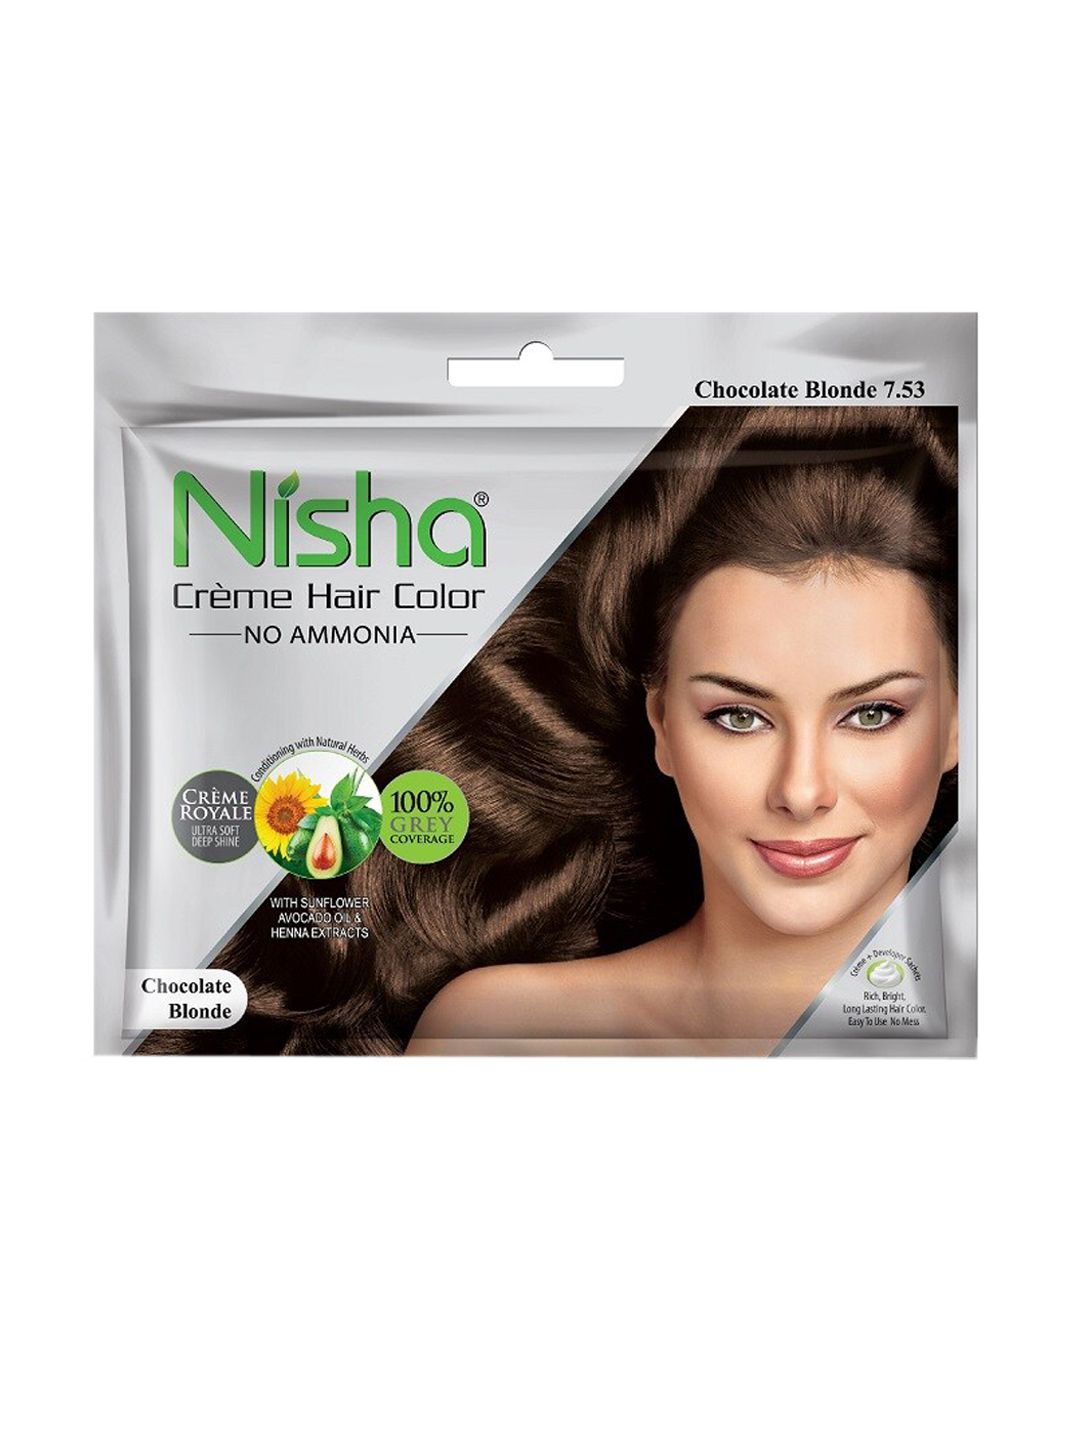 Nisha Pack of 6 Creme Hair Colour 300g - Chocolate Blonde Price in India